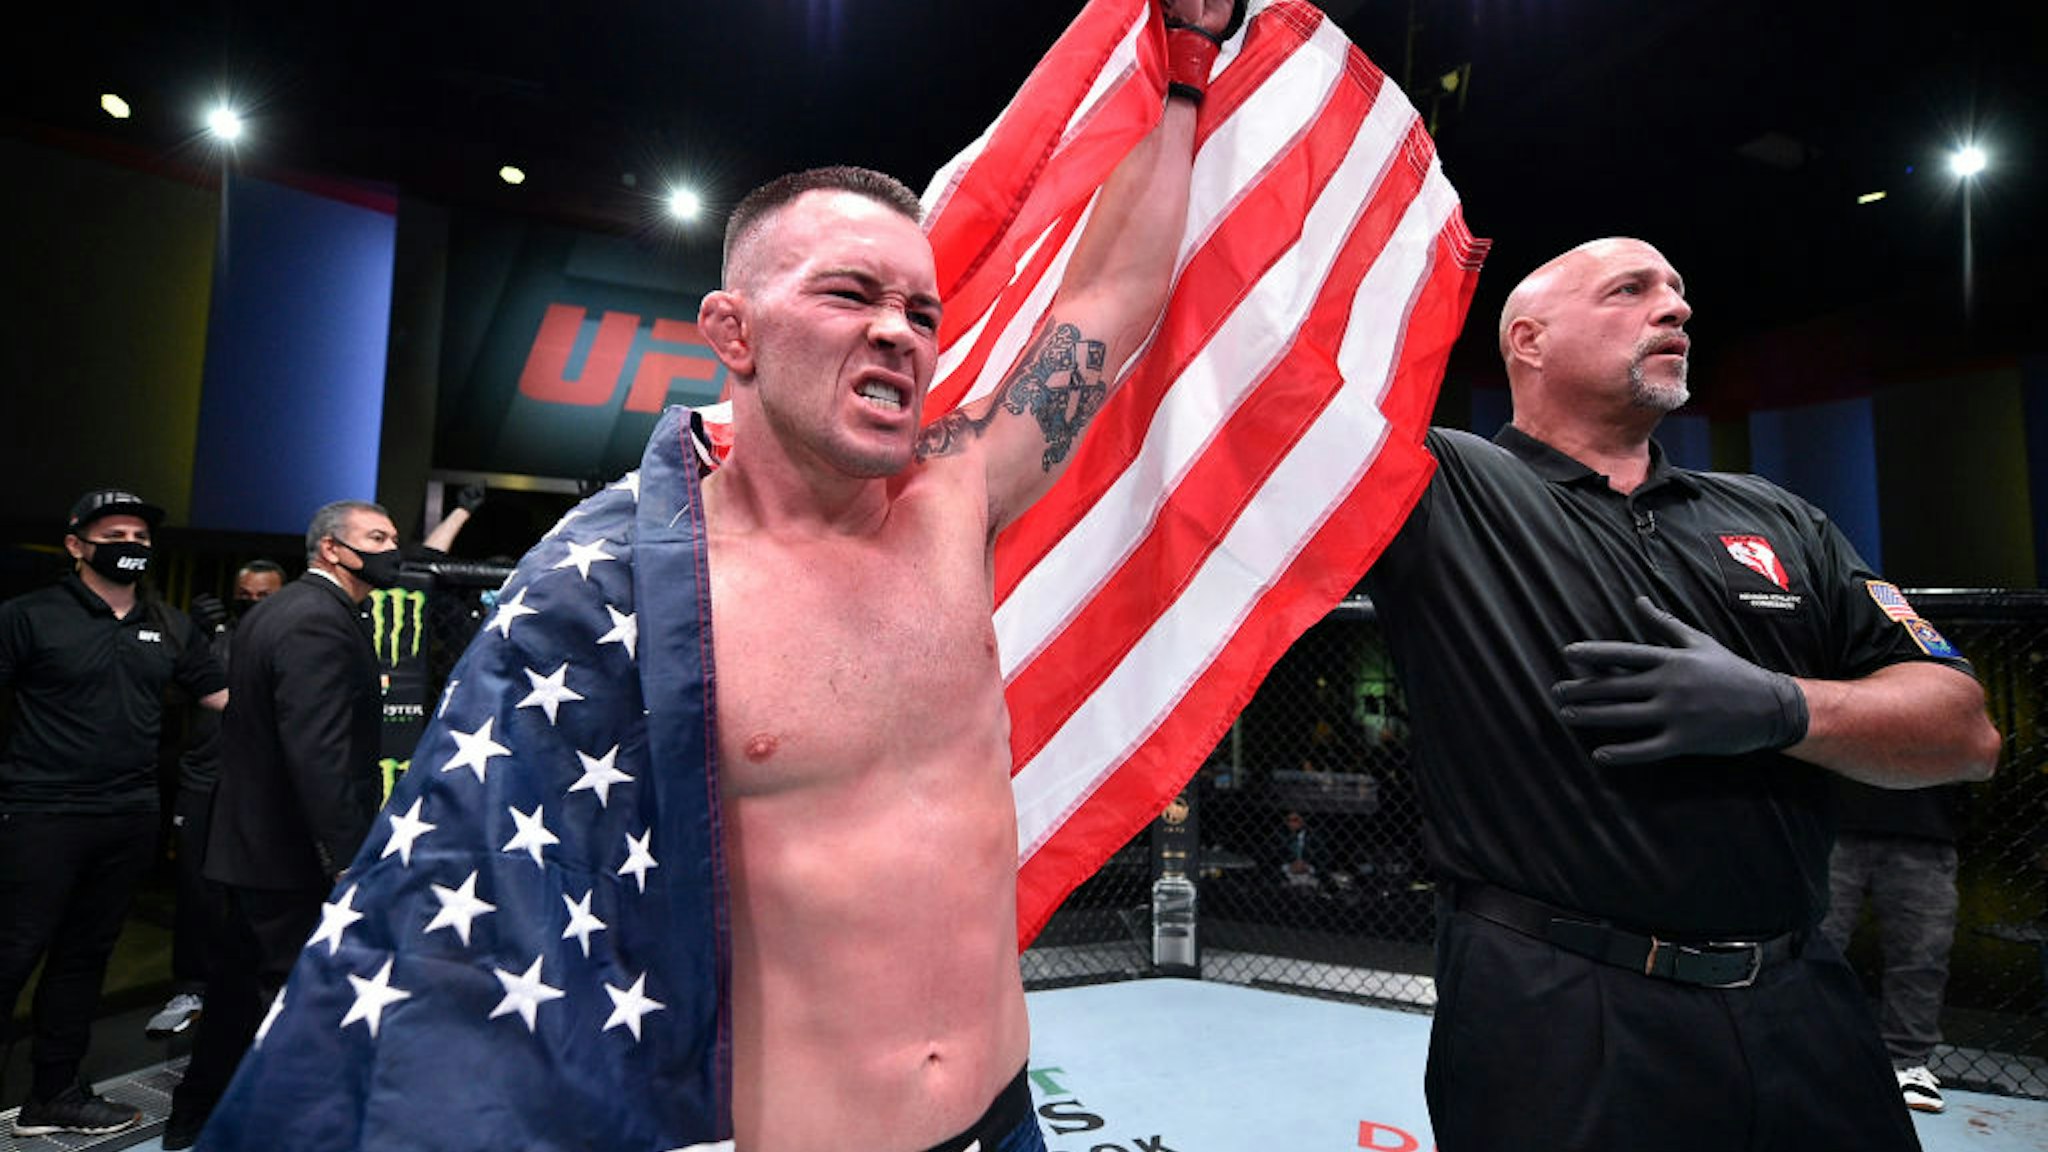 LAS VEGAS, NEVADA - SEPTEMBER 19: Colby Covington reacts after his TKO victory over Tyron Woodley in their welterweight bout during the UFC Fight Night event at UFC APEX on September 19, 2020 in Las Vegas, Nevada. (Photo by Chris Unger/Zuffa LLC)